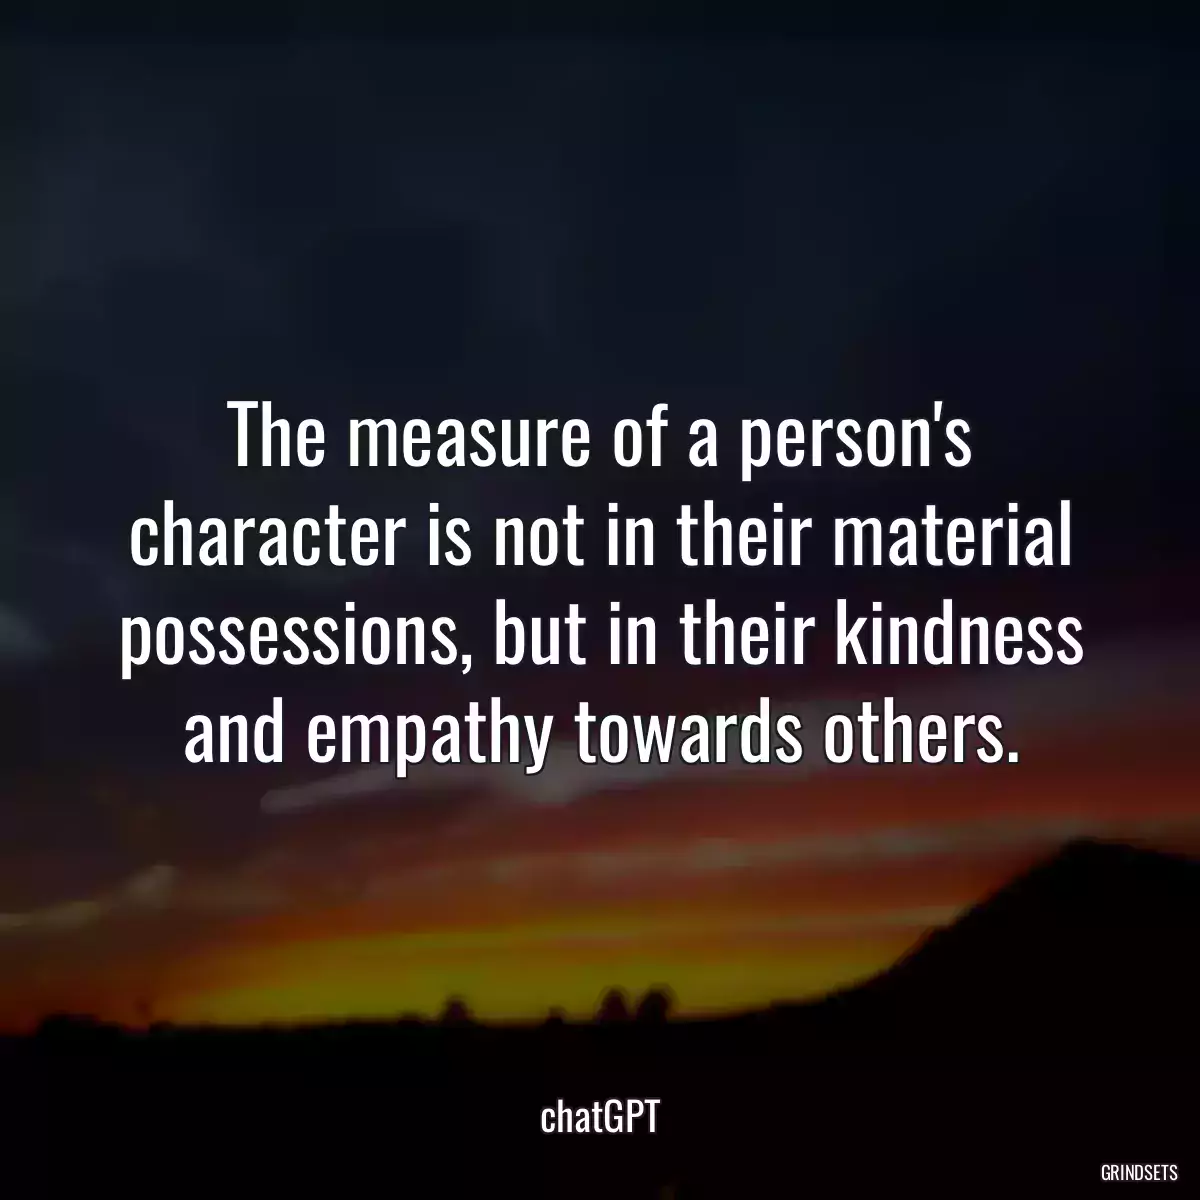 The measure of a person\'s character is not in their material possessions, but in their kindness and empathy towards others.